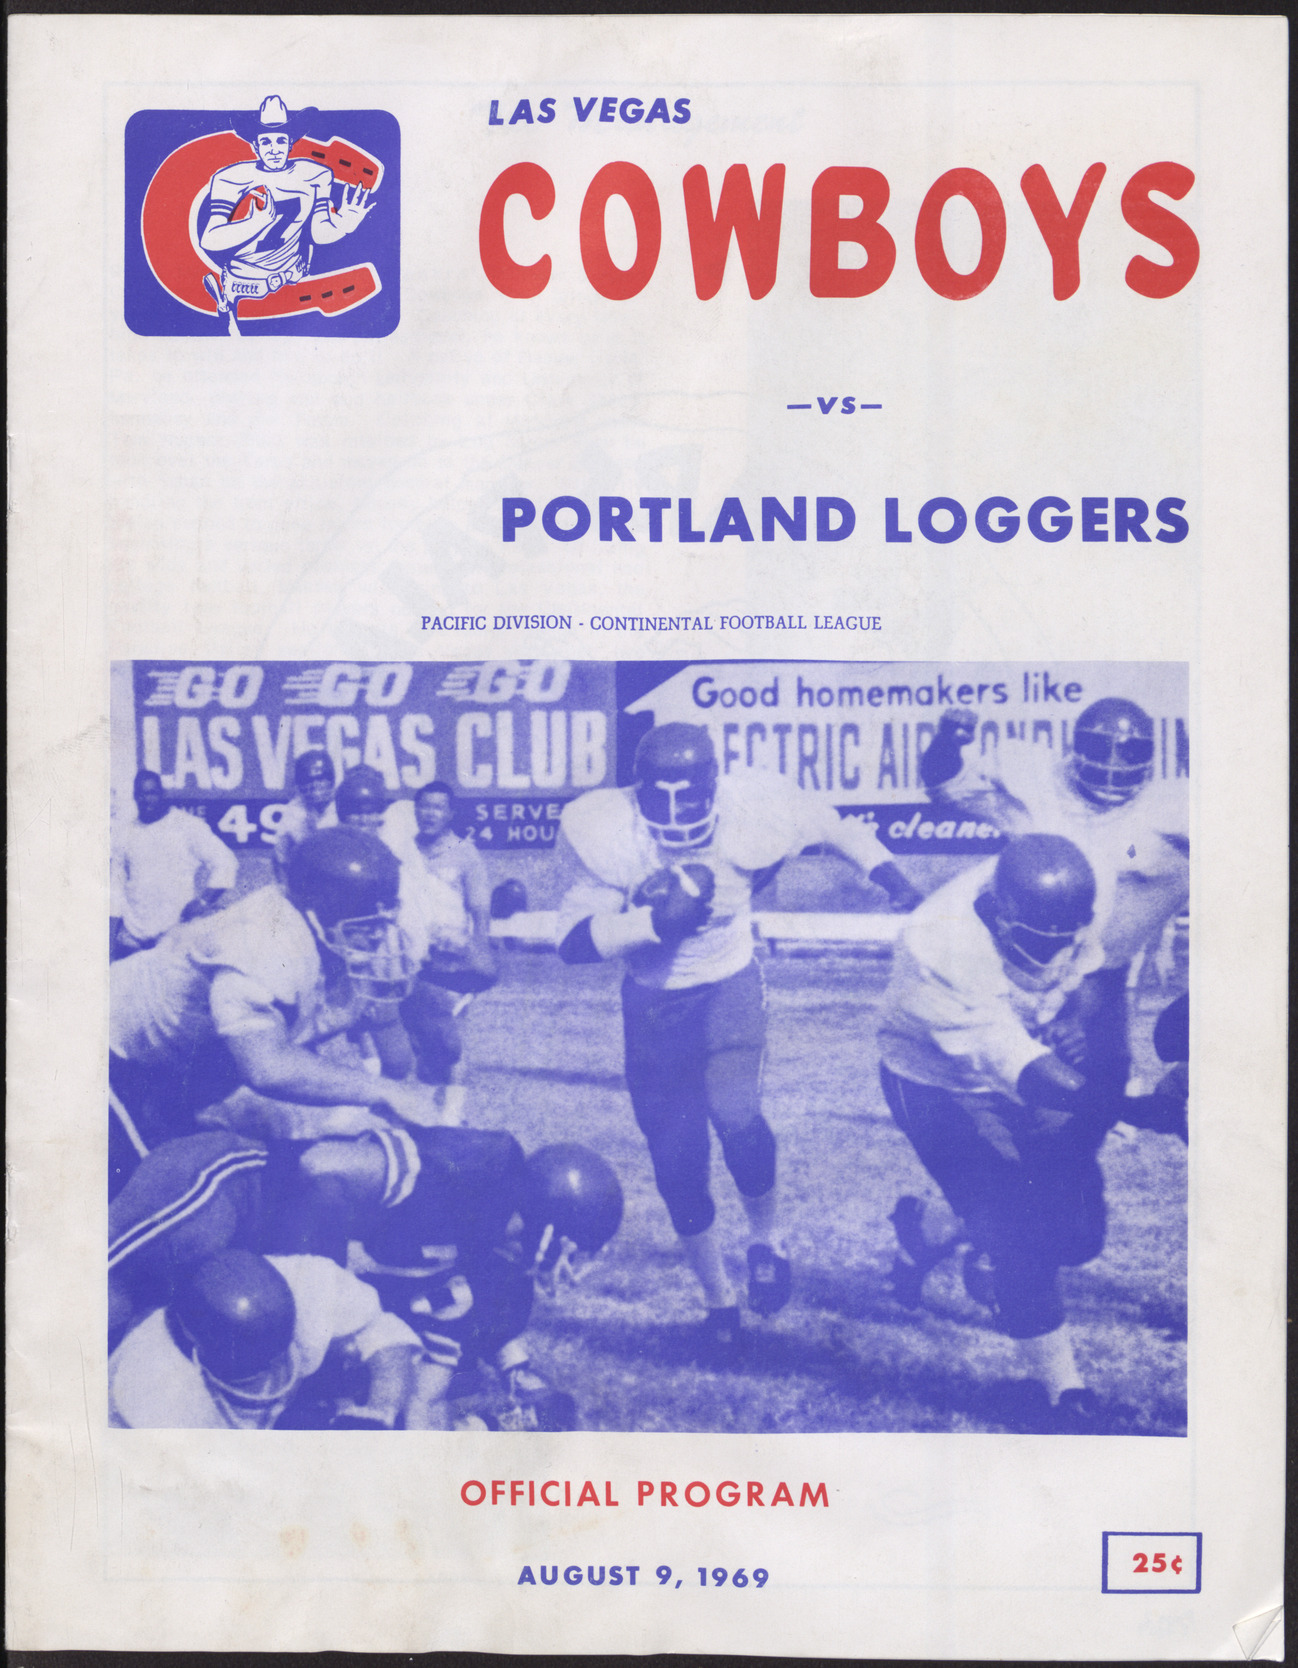 Official Program for the Las Vegas Cowboys vs. Portland Loggers football game (12 pages), August 9, 1969